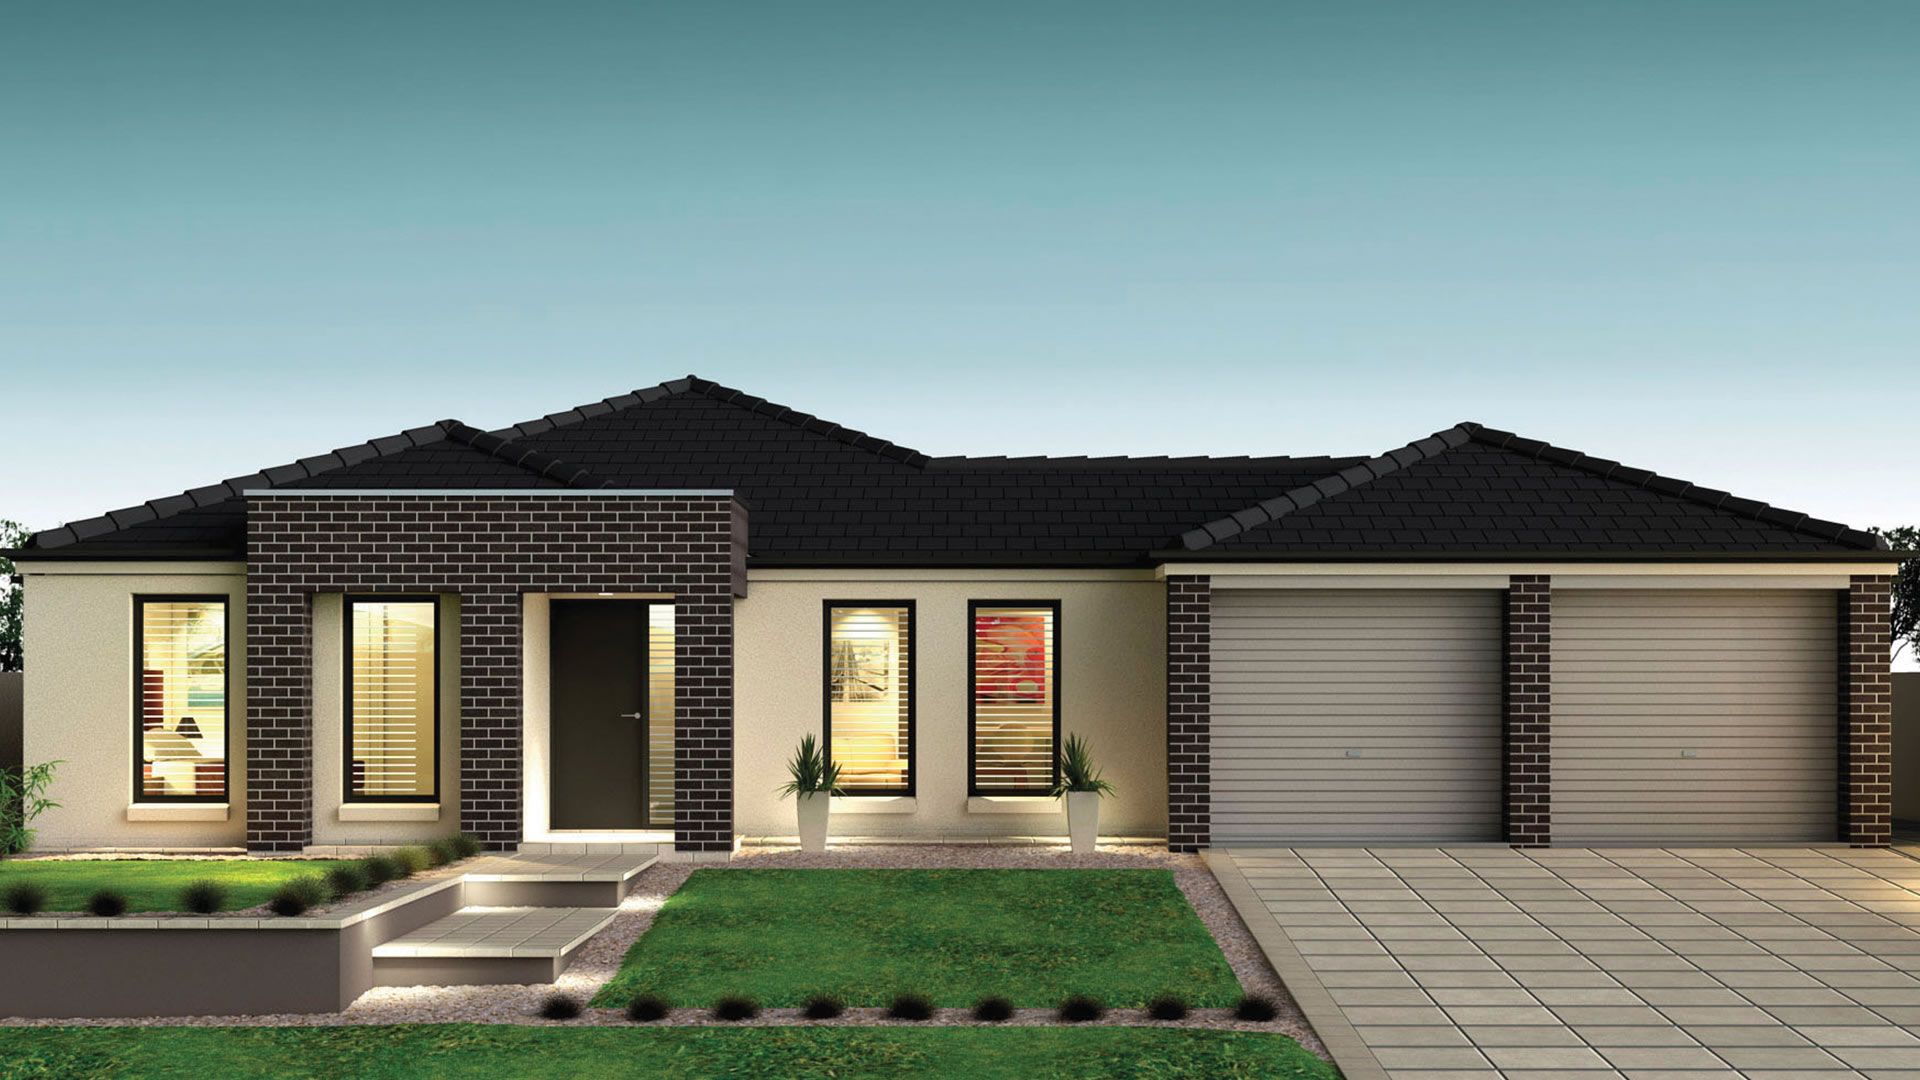 4 bedrooms New House & Land in Lot 310 Cantina Road ANGLE VALE SA, 5117